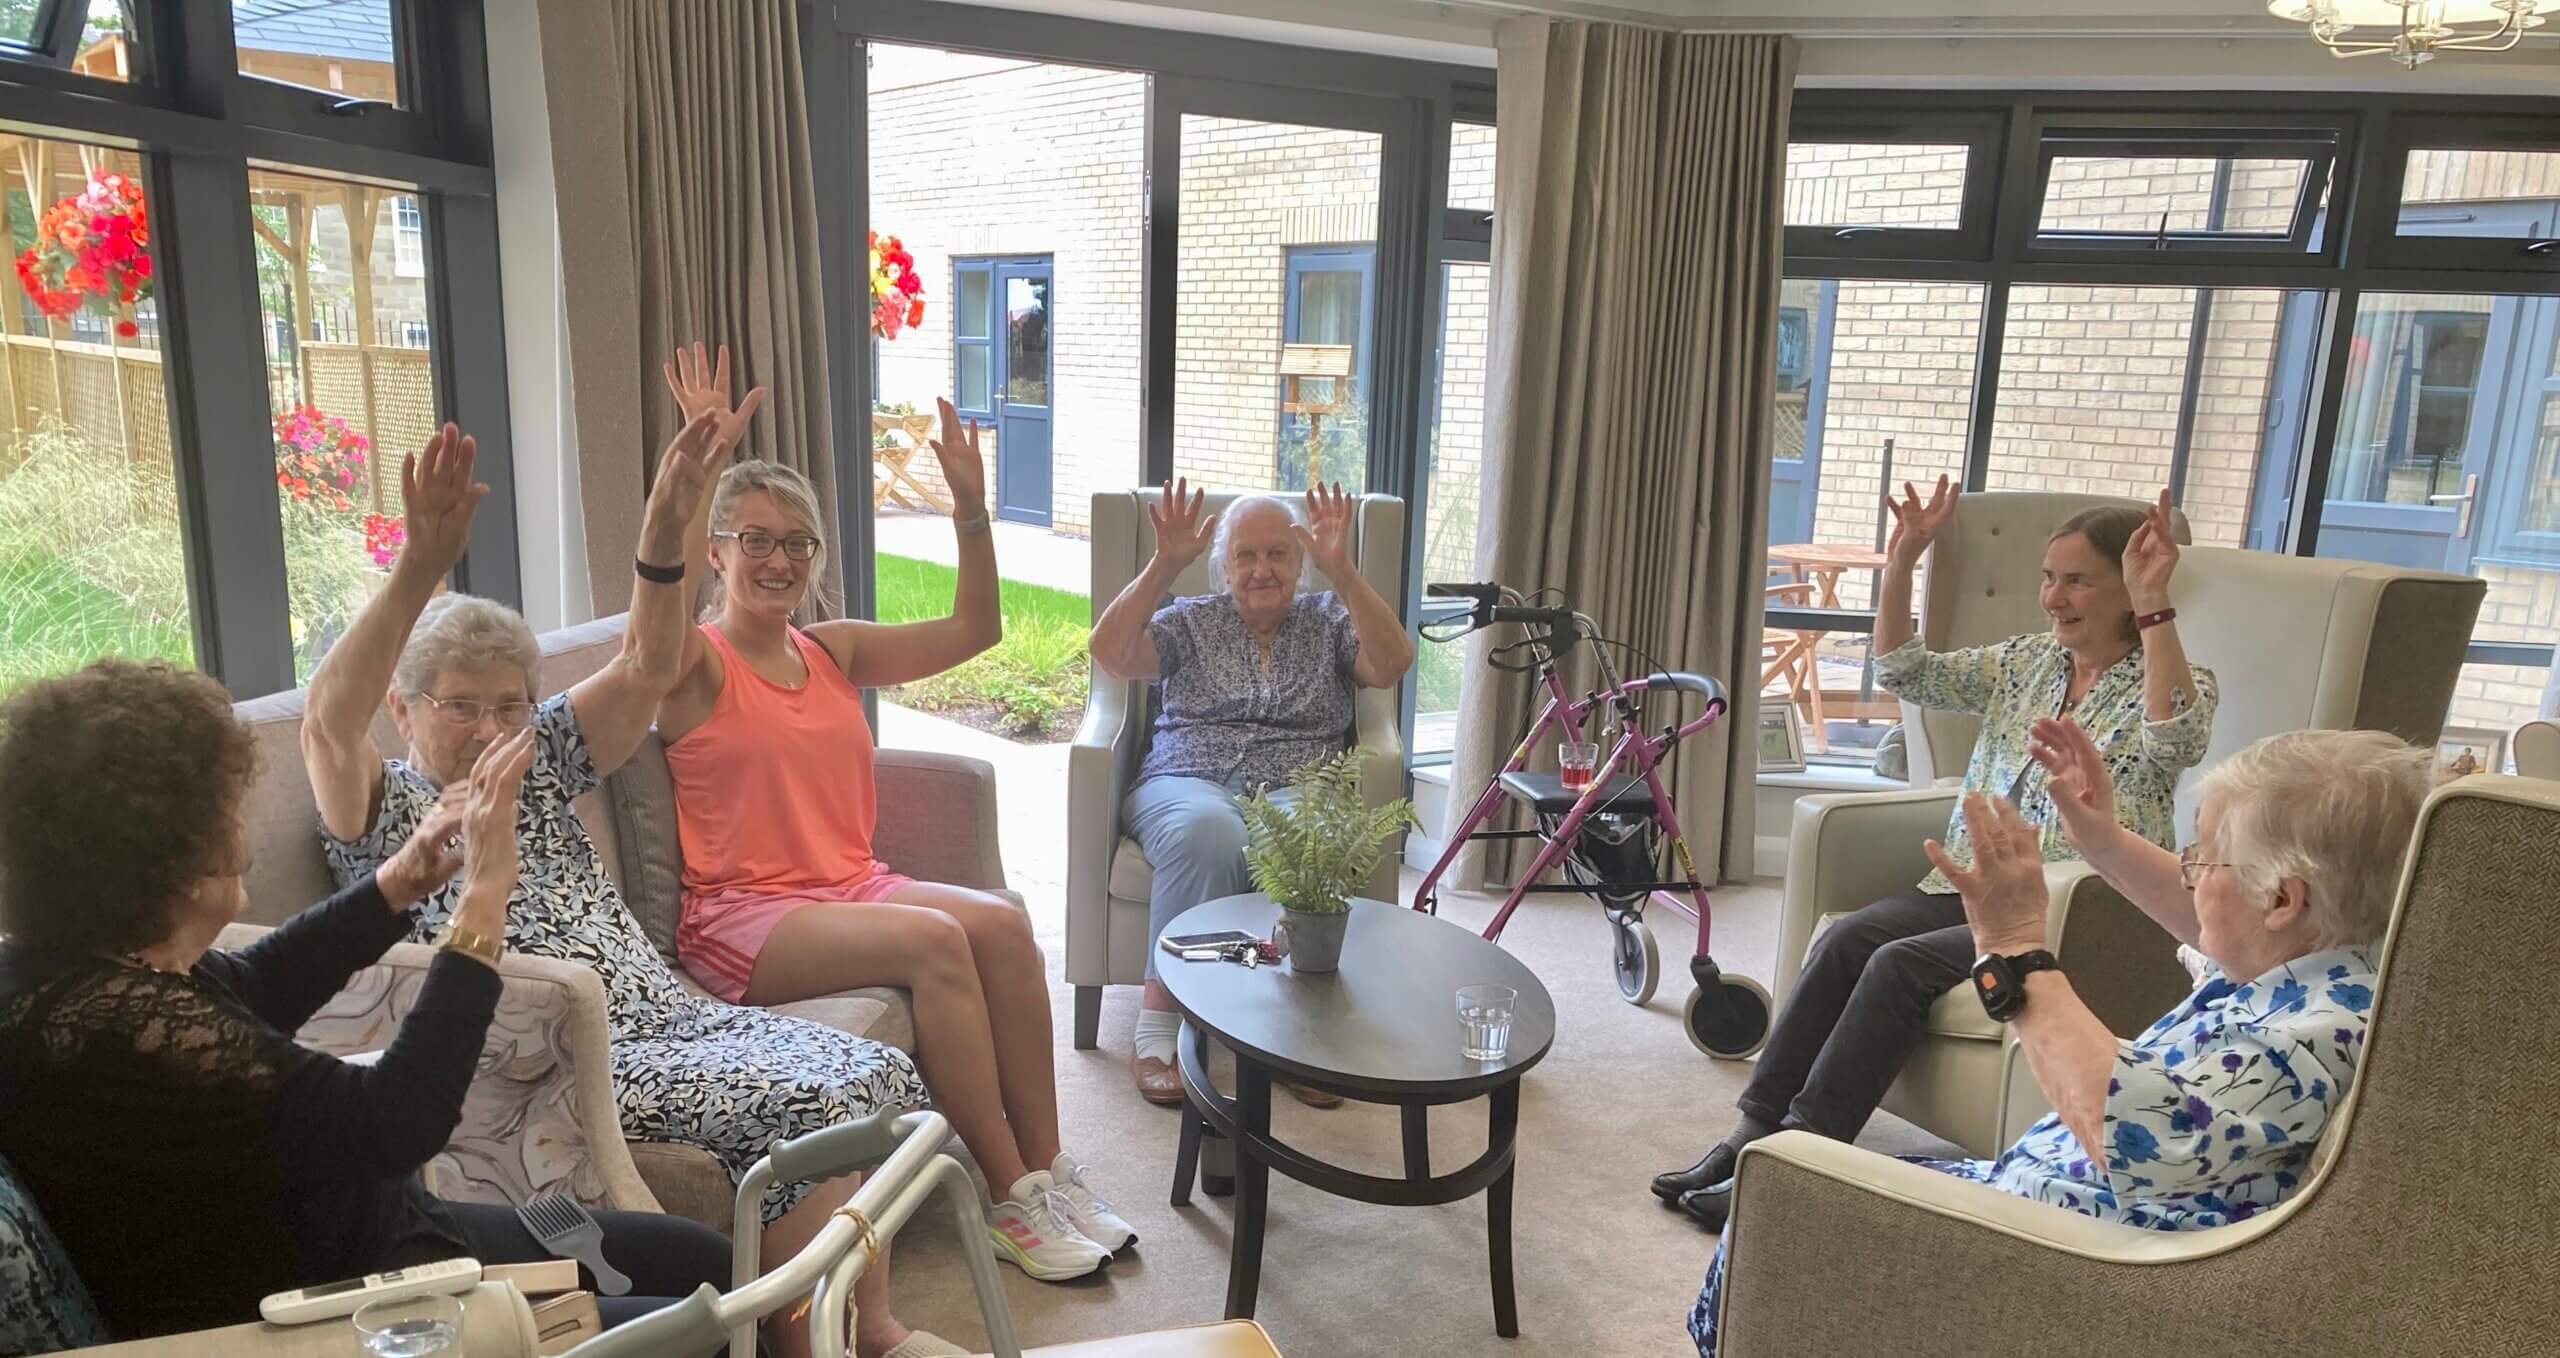 Fun Times at The Mayfield The Mayfield Care Home